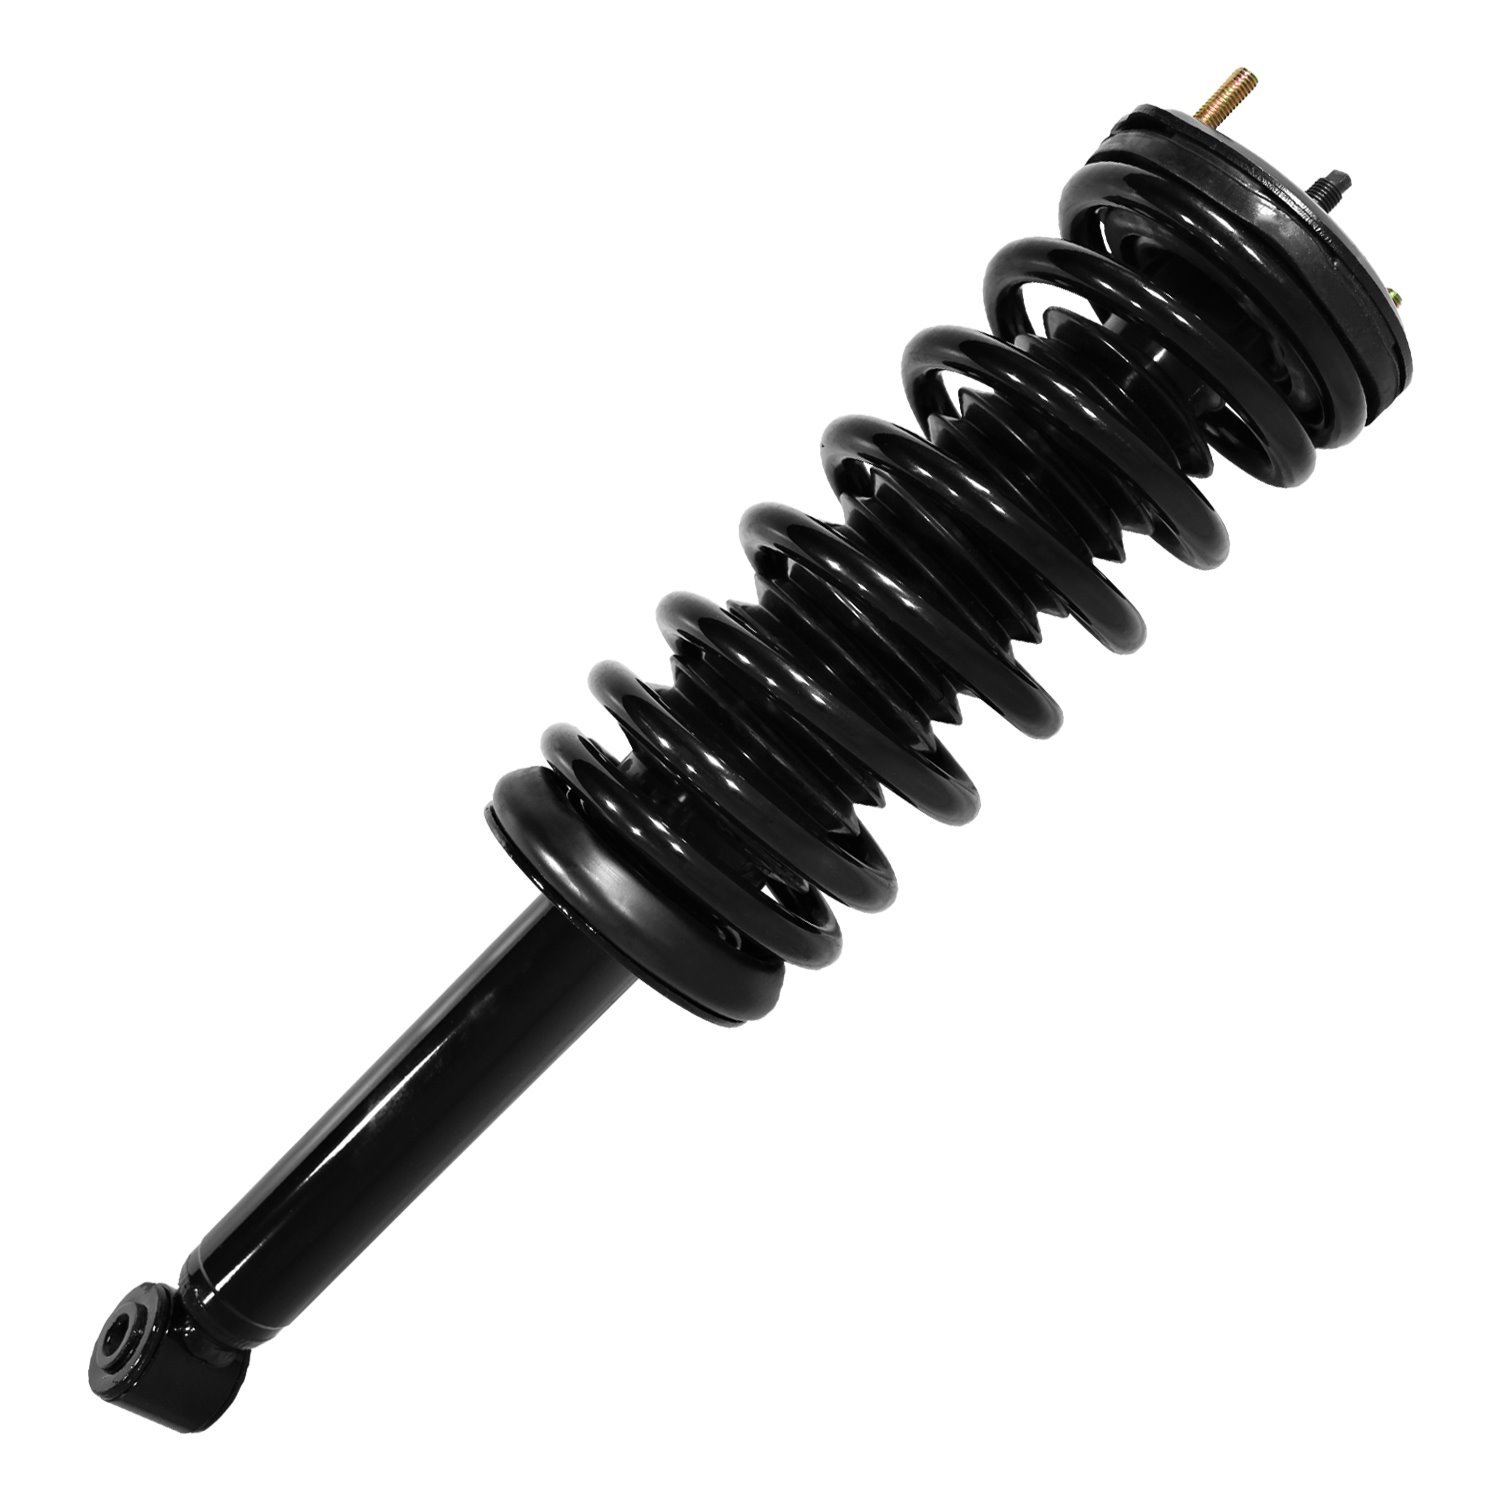 15270 Suspension Strut & Coil Spring Assembly Fits Select Nissan Maxima, Infiniti I30